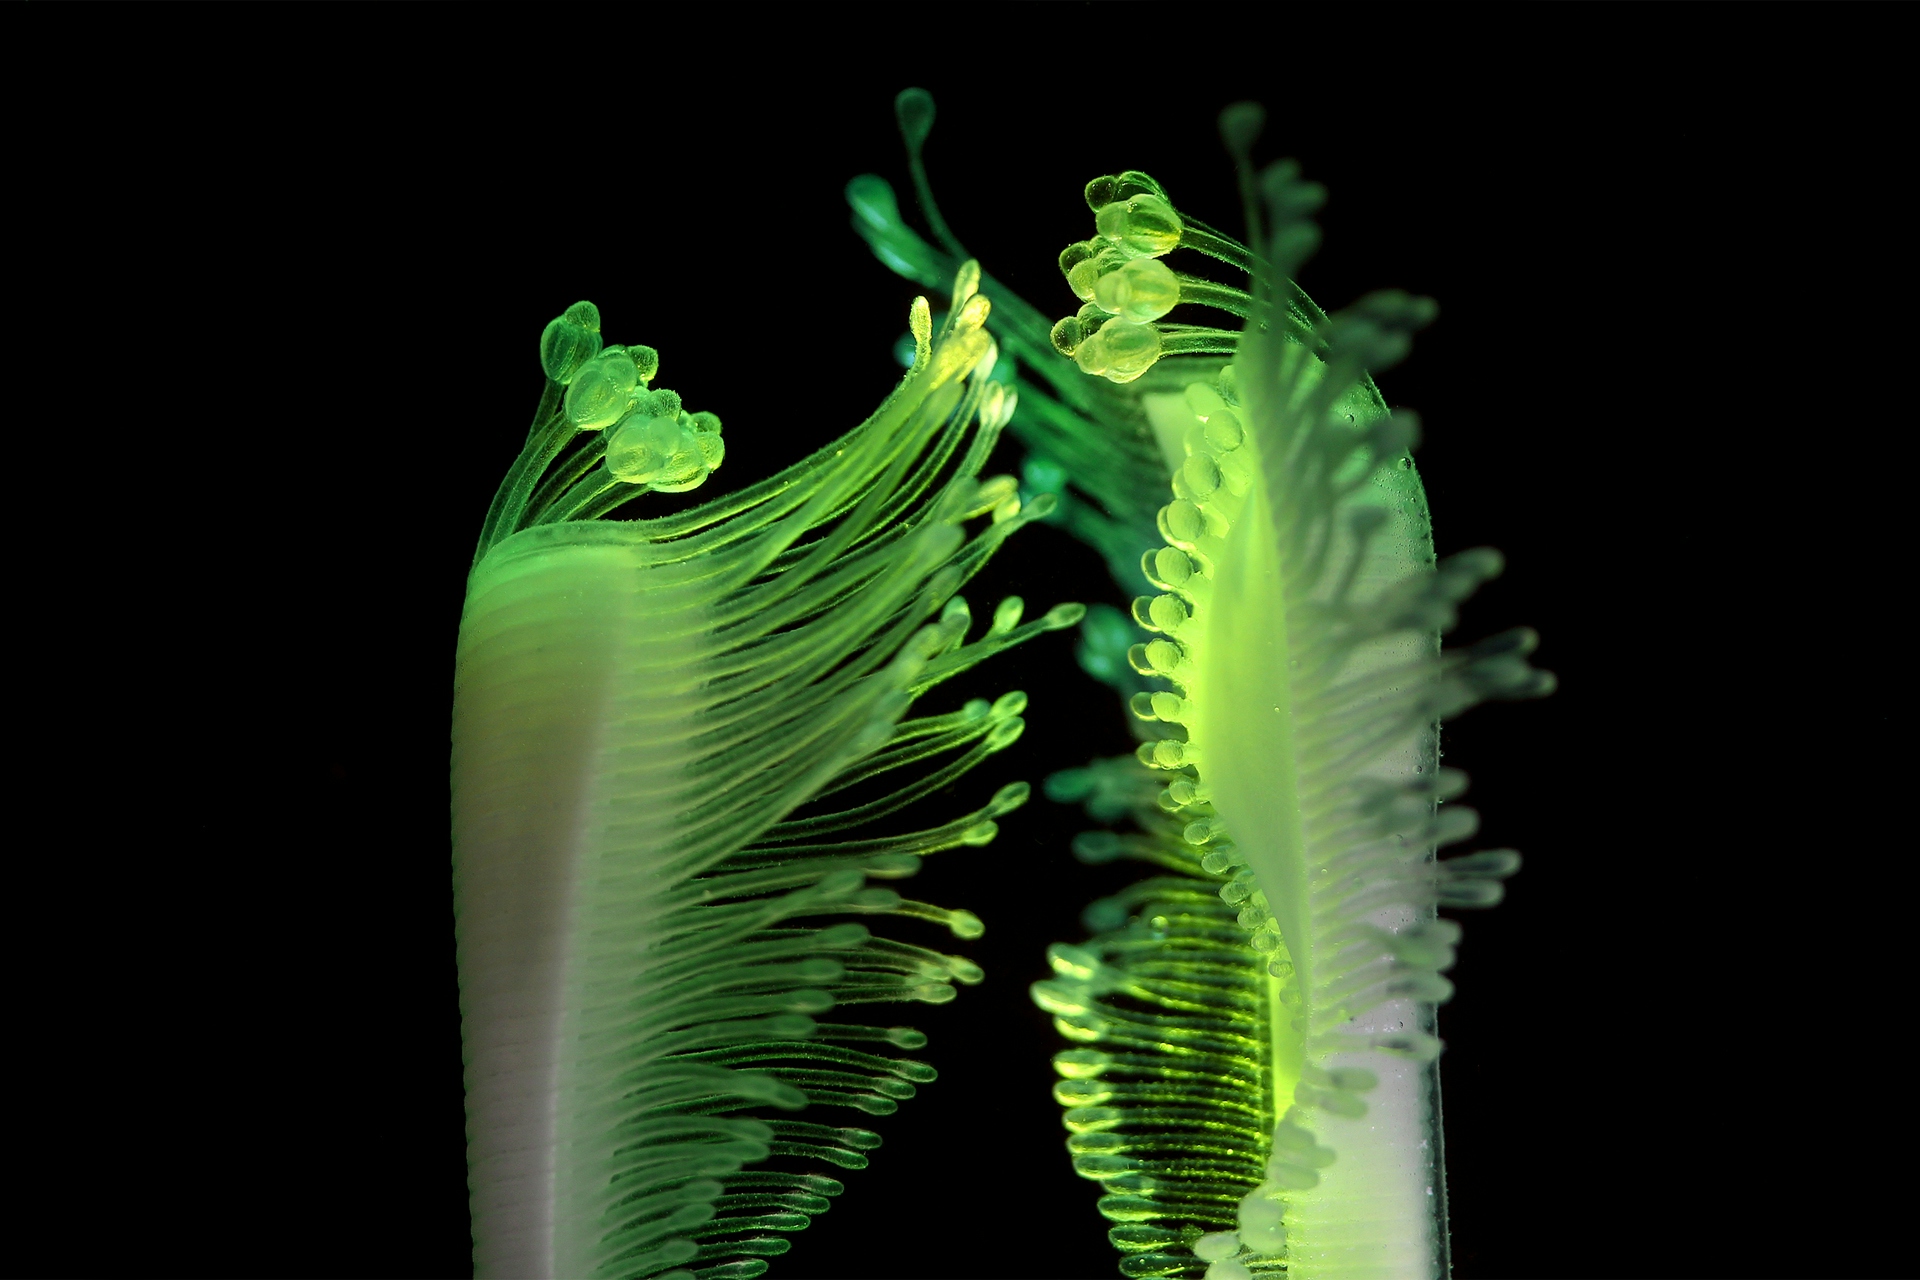 3D printed plant-like forms with feathered tentacles open and close.